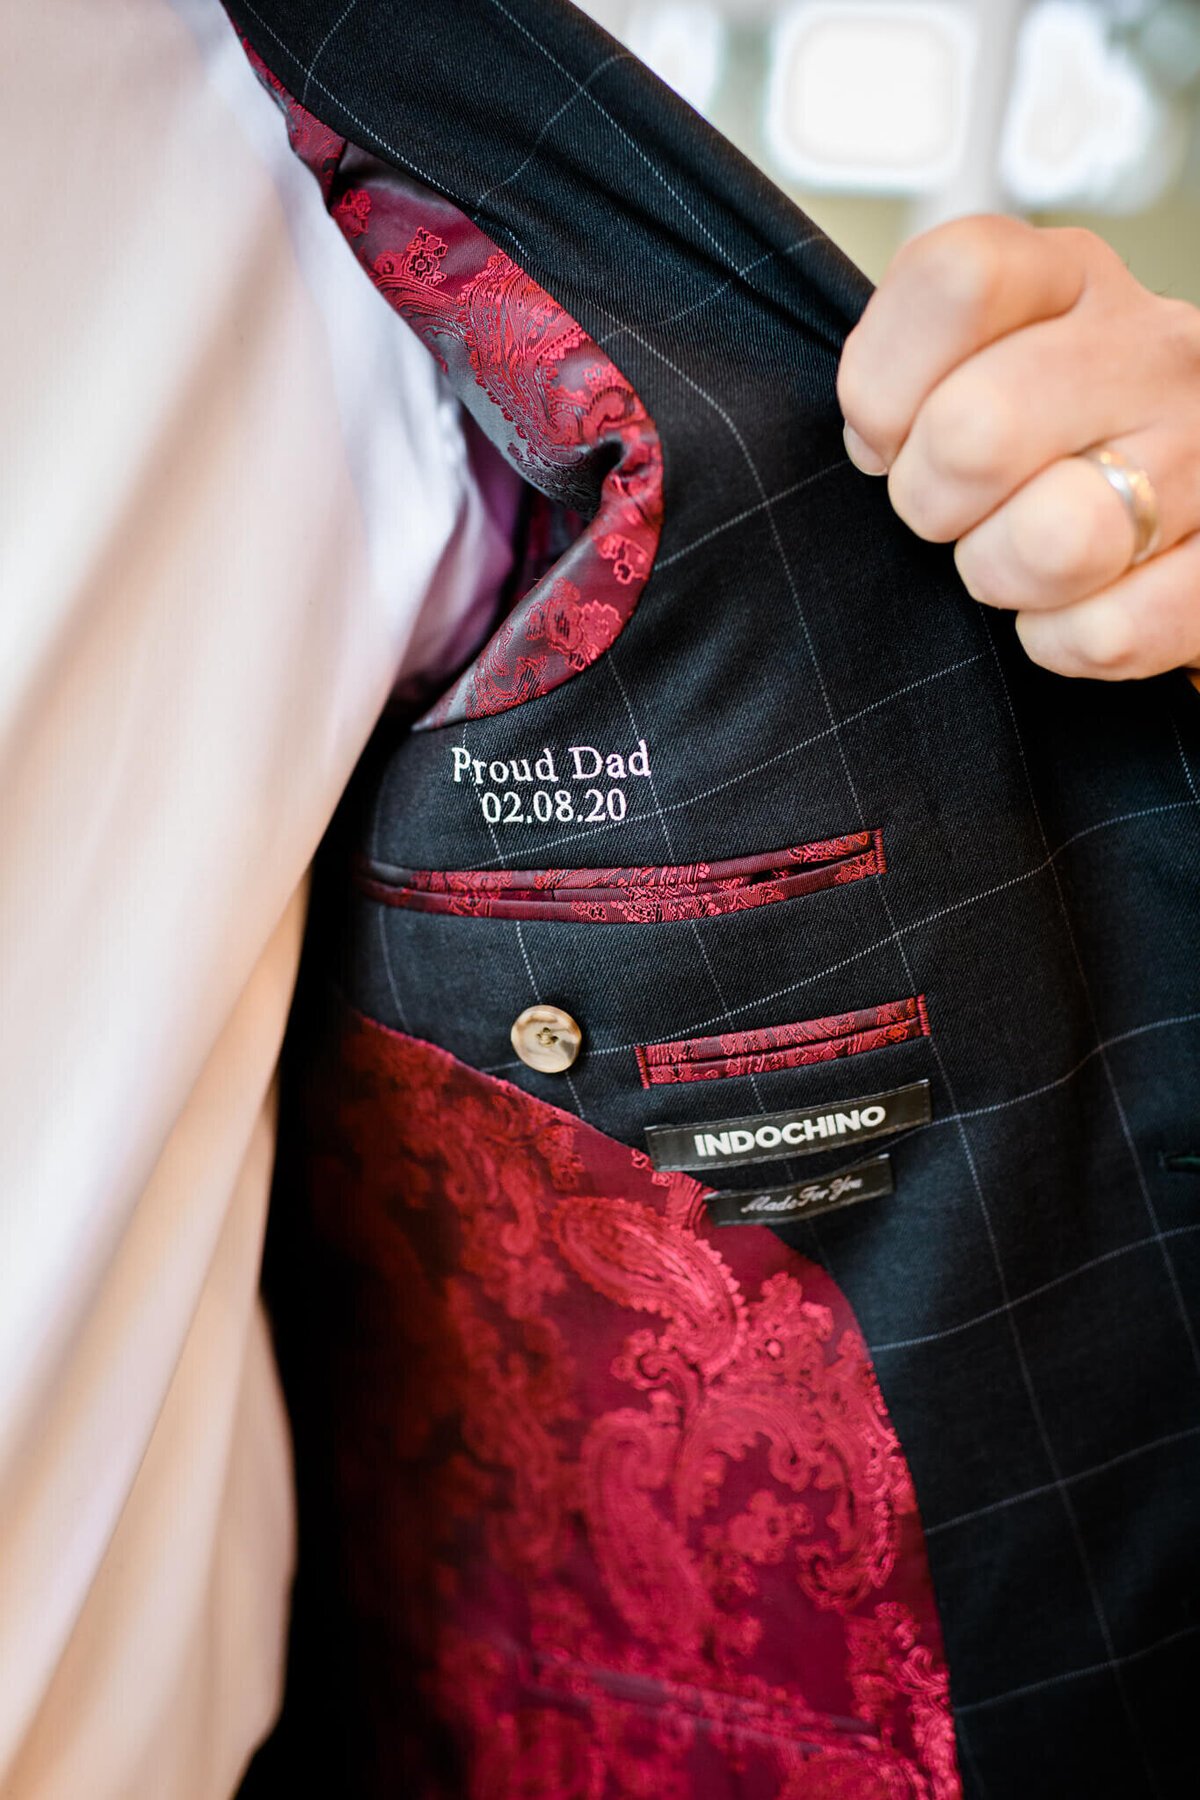 A father shows off his embroidered suit pocket commemorating his sons bar mitzvah